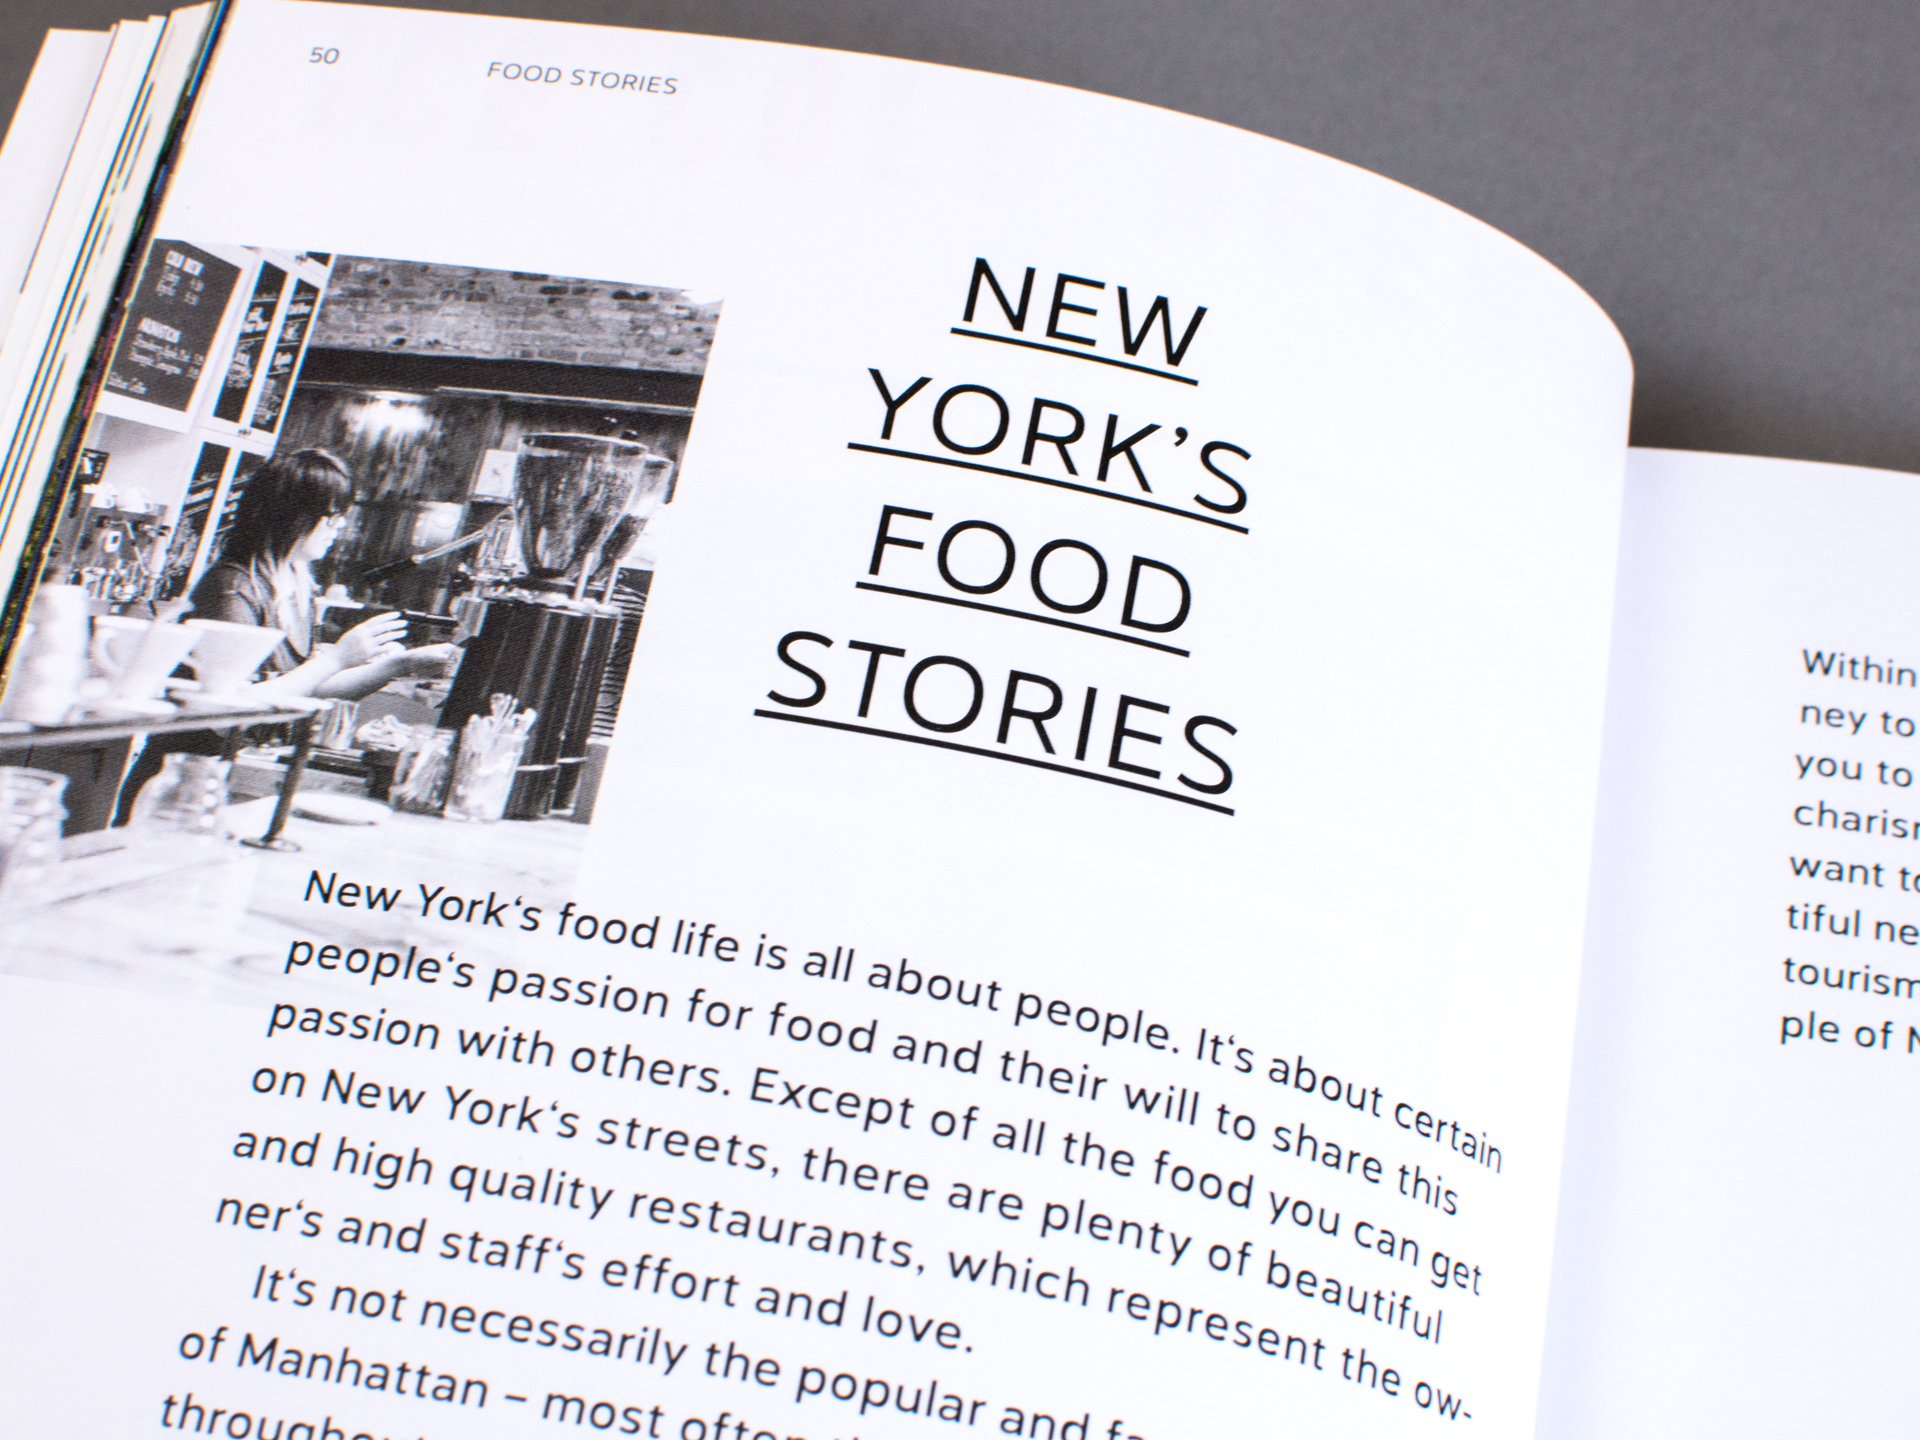 Taste of New York – A culinary Guide to New York City (7)